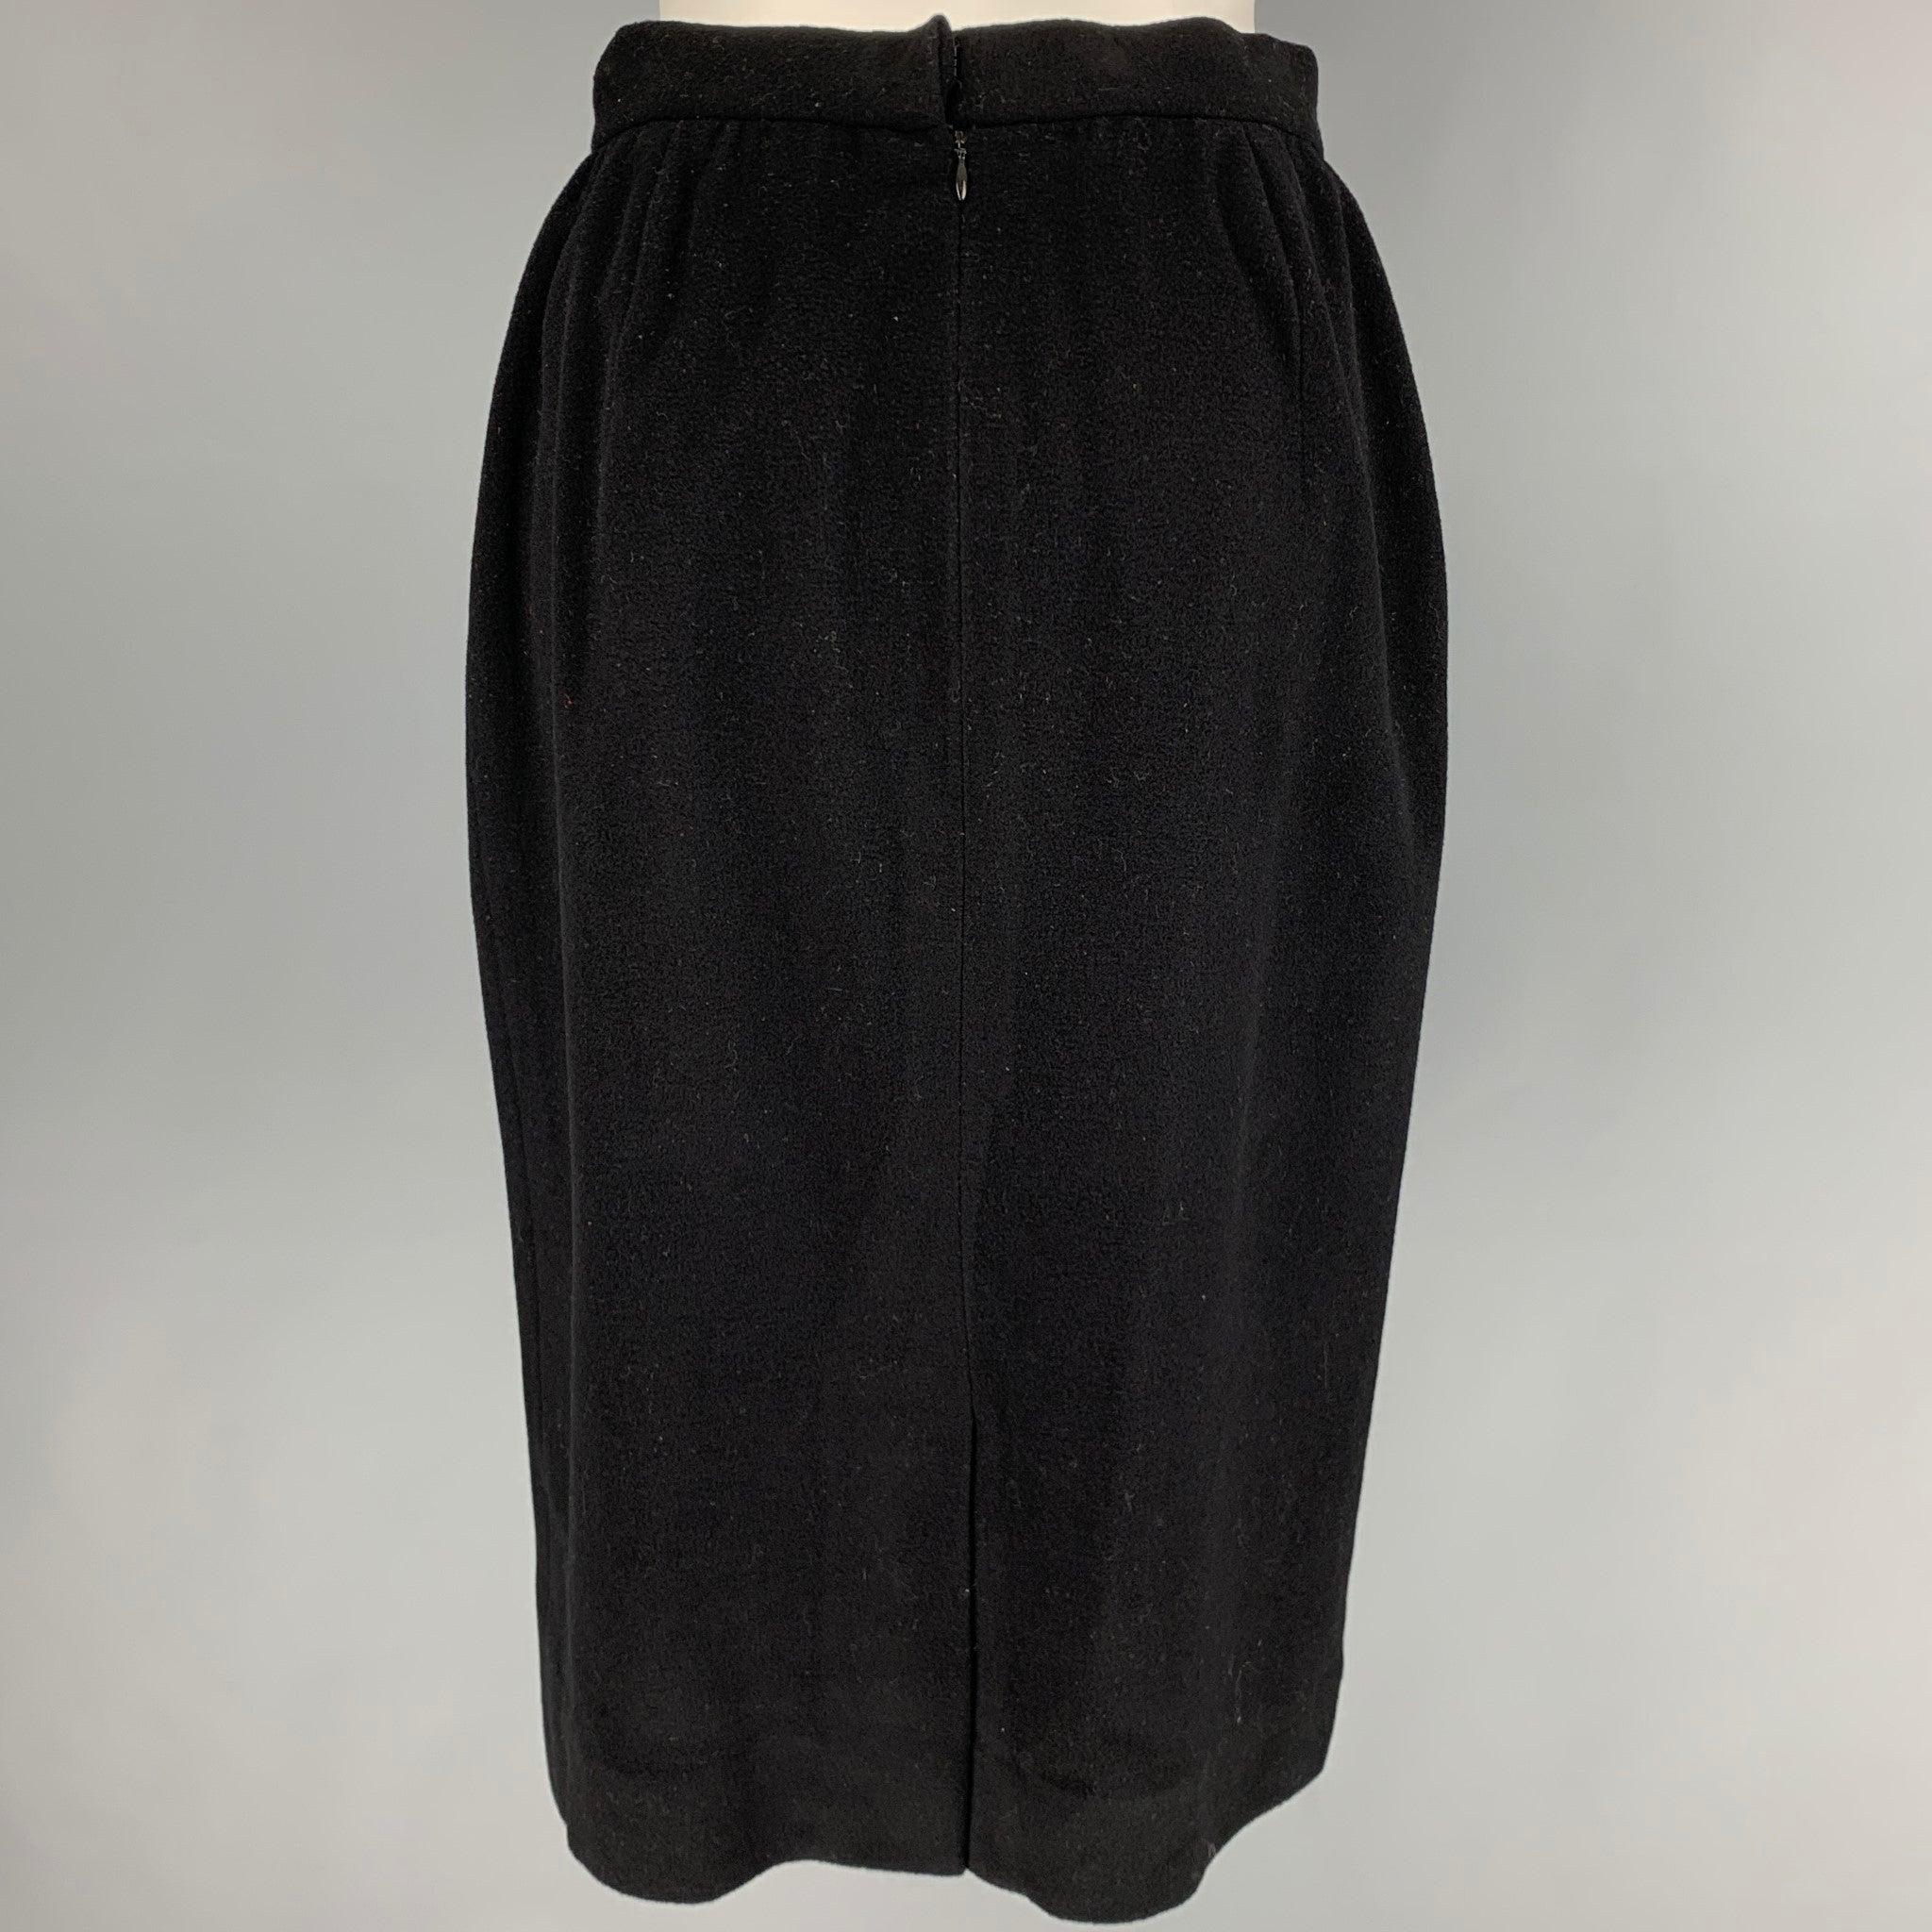 Vintage DONNA KARAN skirt
in a
black wool cashmere blend fabric with a slip liner featuring a pencil style, below knee length, and back zipper closure. Made in USA.Very Good Pre-Owned Condition. Moderate signs of wear. 

Marked:   size not marked